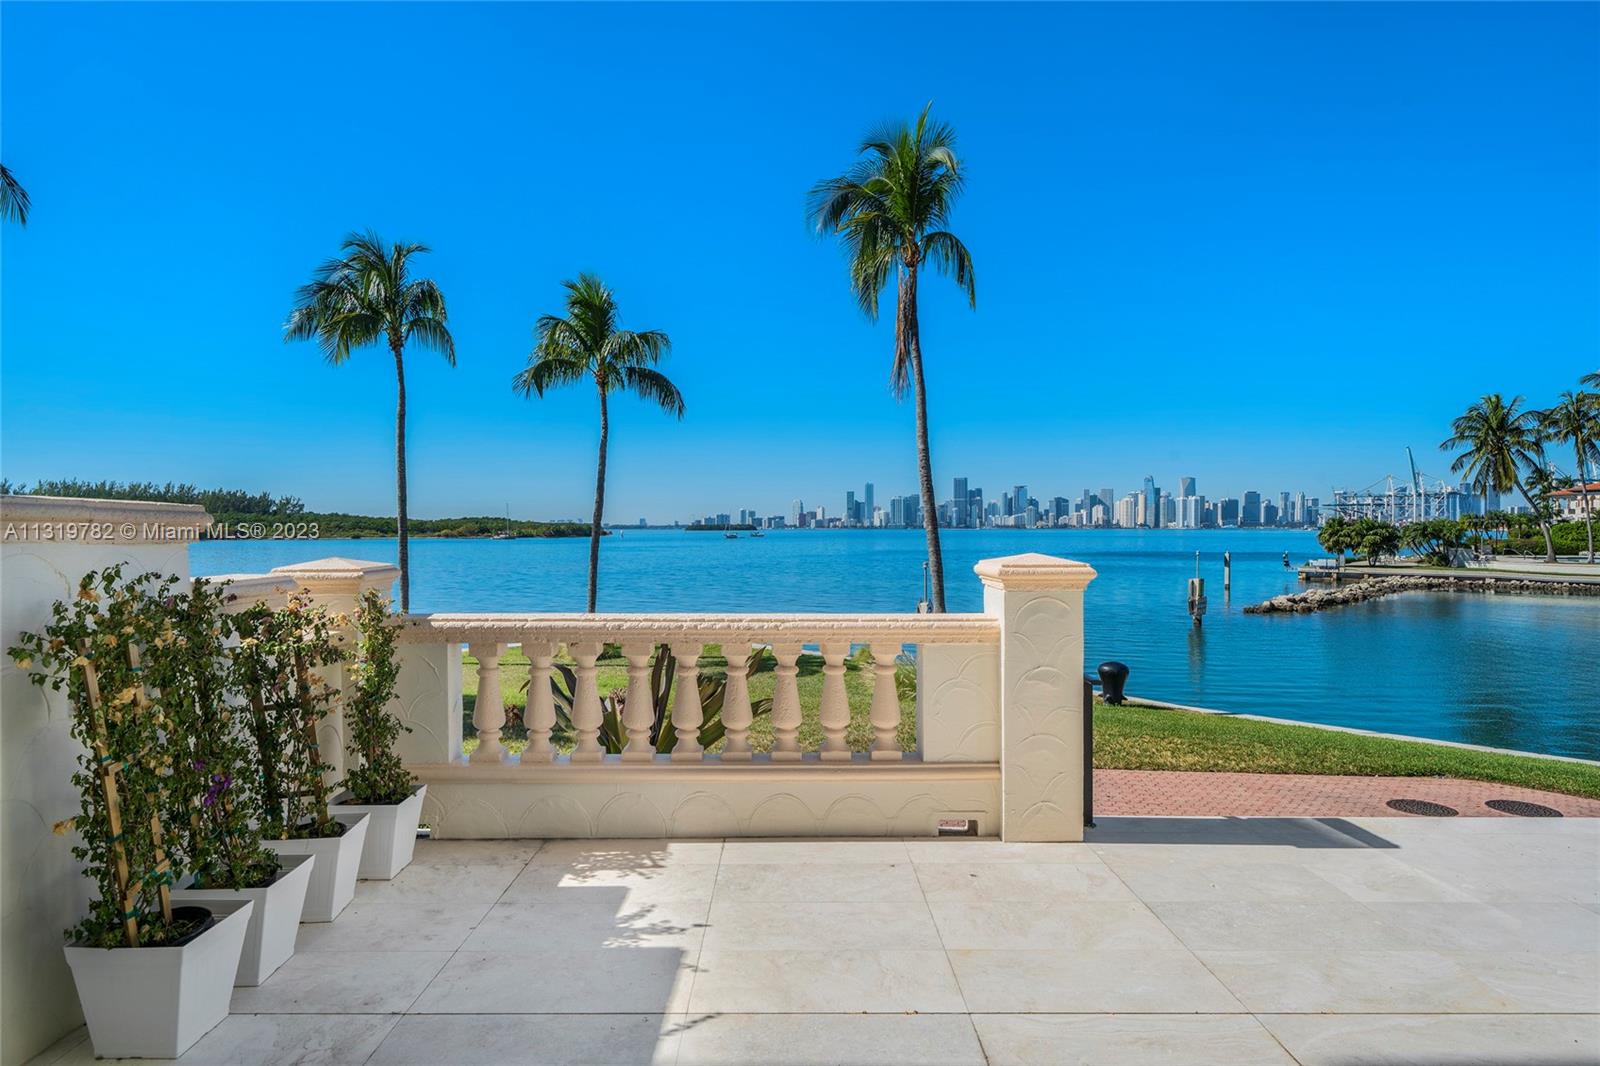 This most sought-after ground floor 3BR/3+1BA corner unit sits on the point of Fisher Island providing panoramic unobstructed views of Virginia Key, Biscayne Bay, Fisher Island Marina & sunsets over the downtown Miami Skyline. This French modern unit has been totally remodeled in 2022 & boasts French oak hardwood floors, 3,317 SF with open living & dining areas surrounded by walls of glass w/direct bay/city views & access to a full wrapping terrace. A Chef’s kitchen sports La Corneu cooktop, top-of-the-line Gaggenau & Miele appliances & crystal agate center island w/eat-in seating. The sumptuous principal suite features a seating area, large walk-in closet & stunning principal bathroom w/dolomite floors & walk-in rain shower. The 2 other bedrooms each uniquely designed w/en-suite baths.